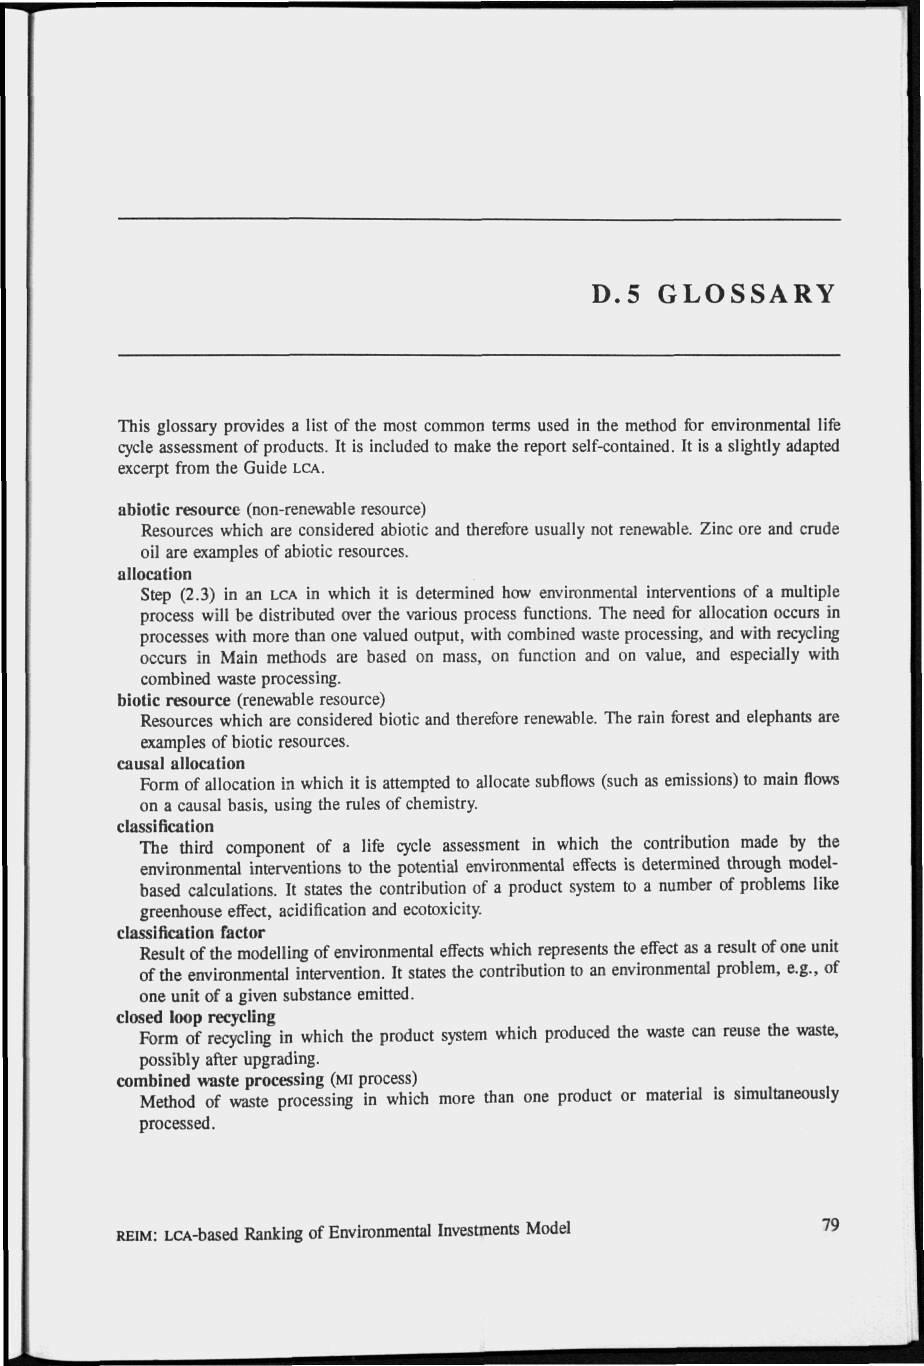 D.5 GLOSSARY This glossary provides a list of the most common terms used in the method for environmental life cycle assessment of products. It is included to make the report self-contained.